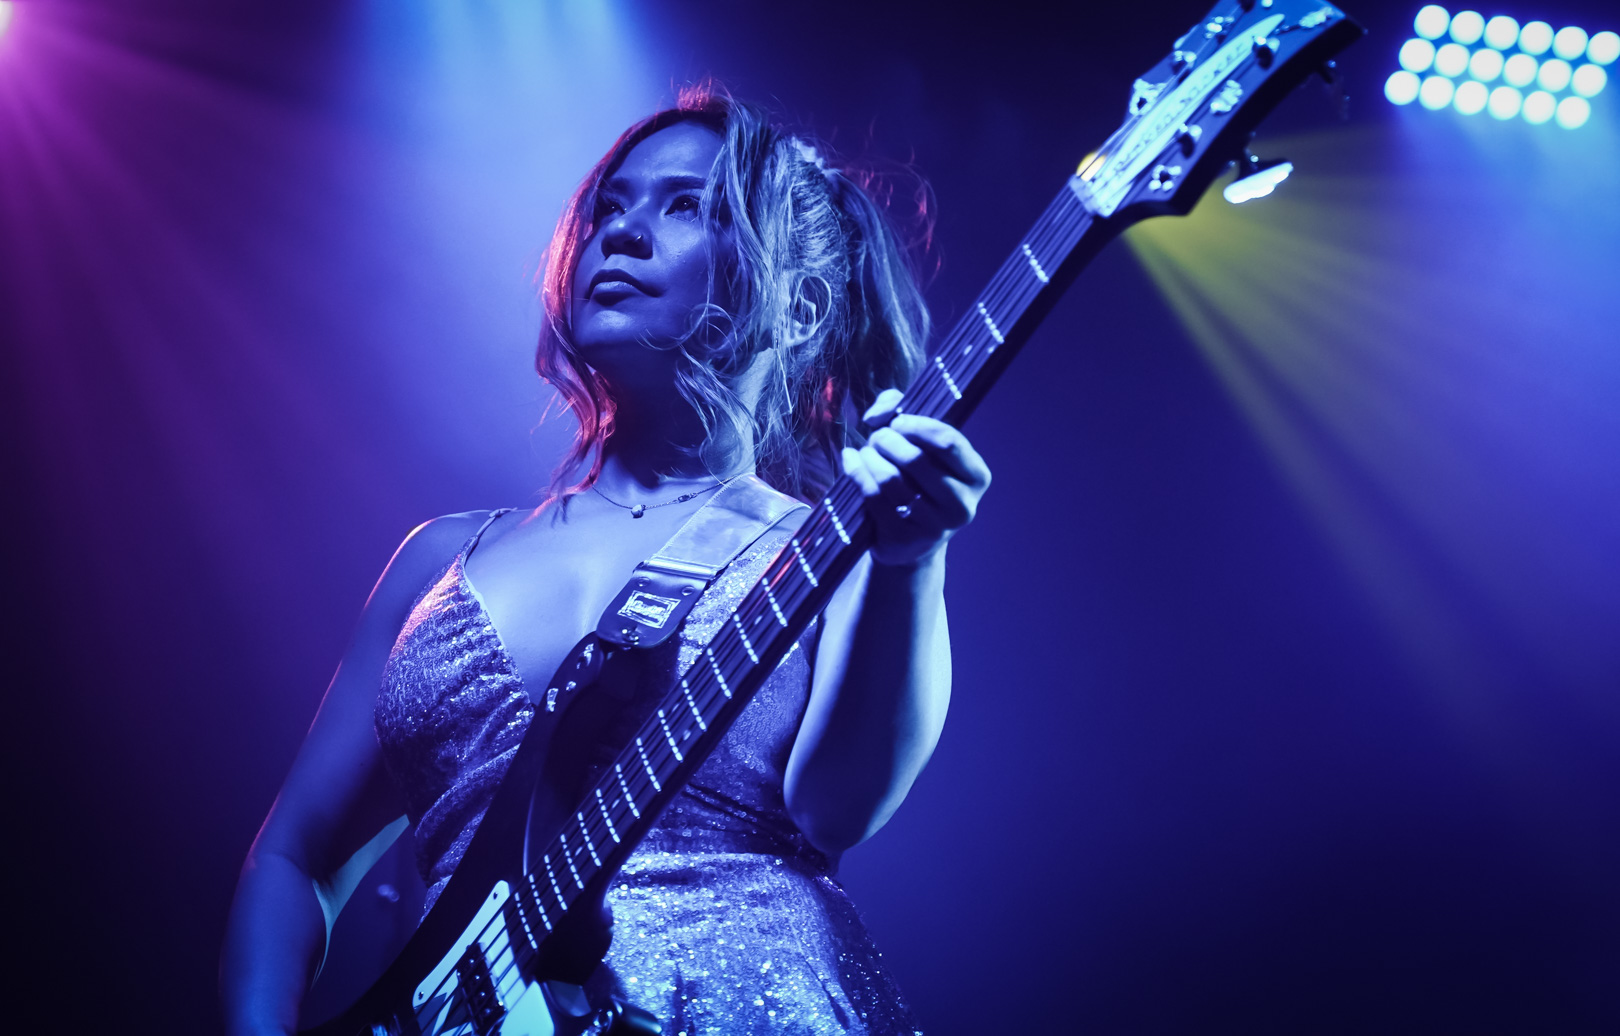 A woman playing bass on stage